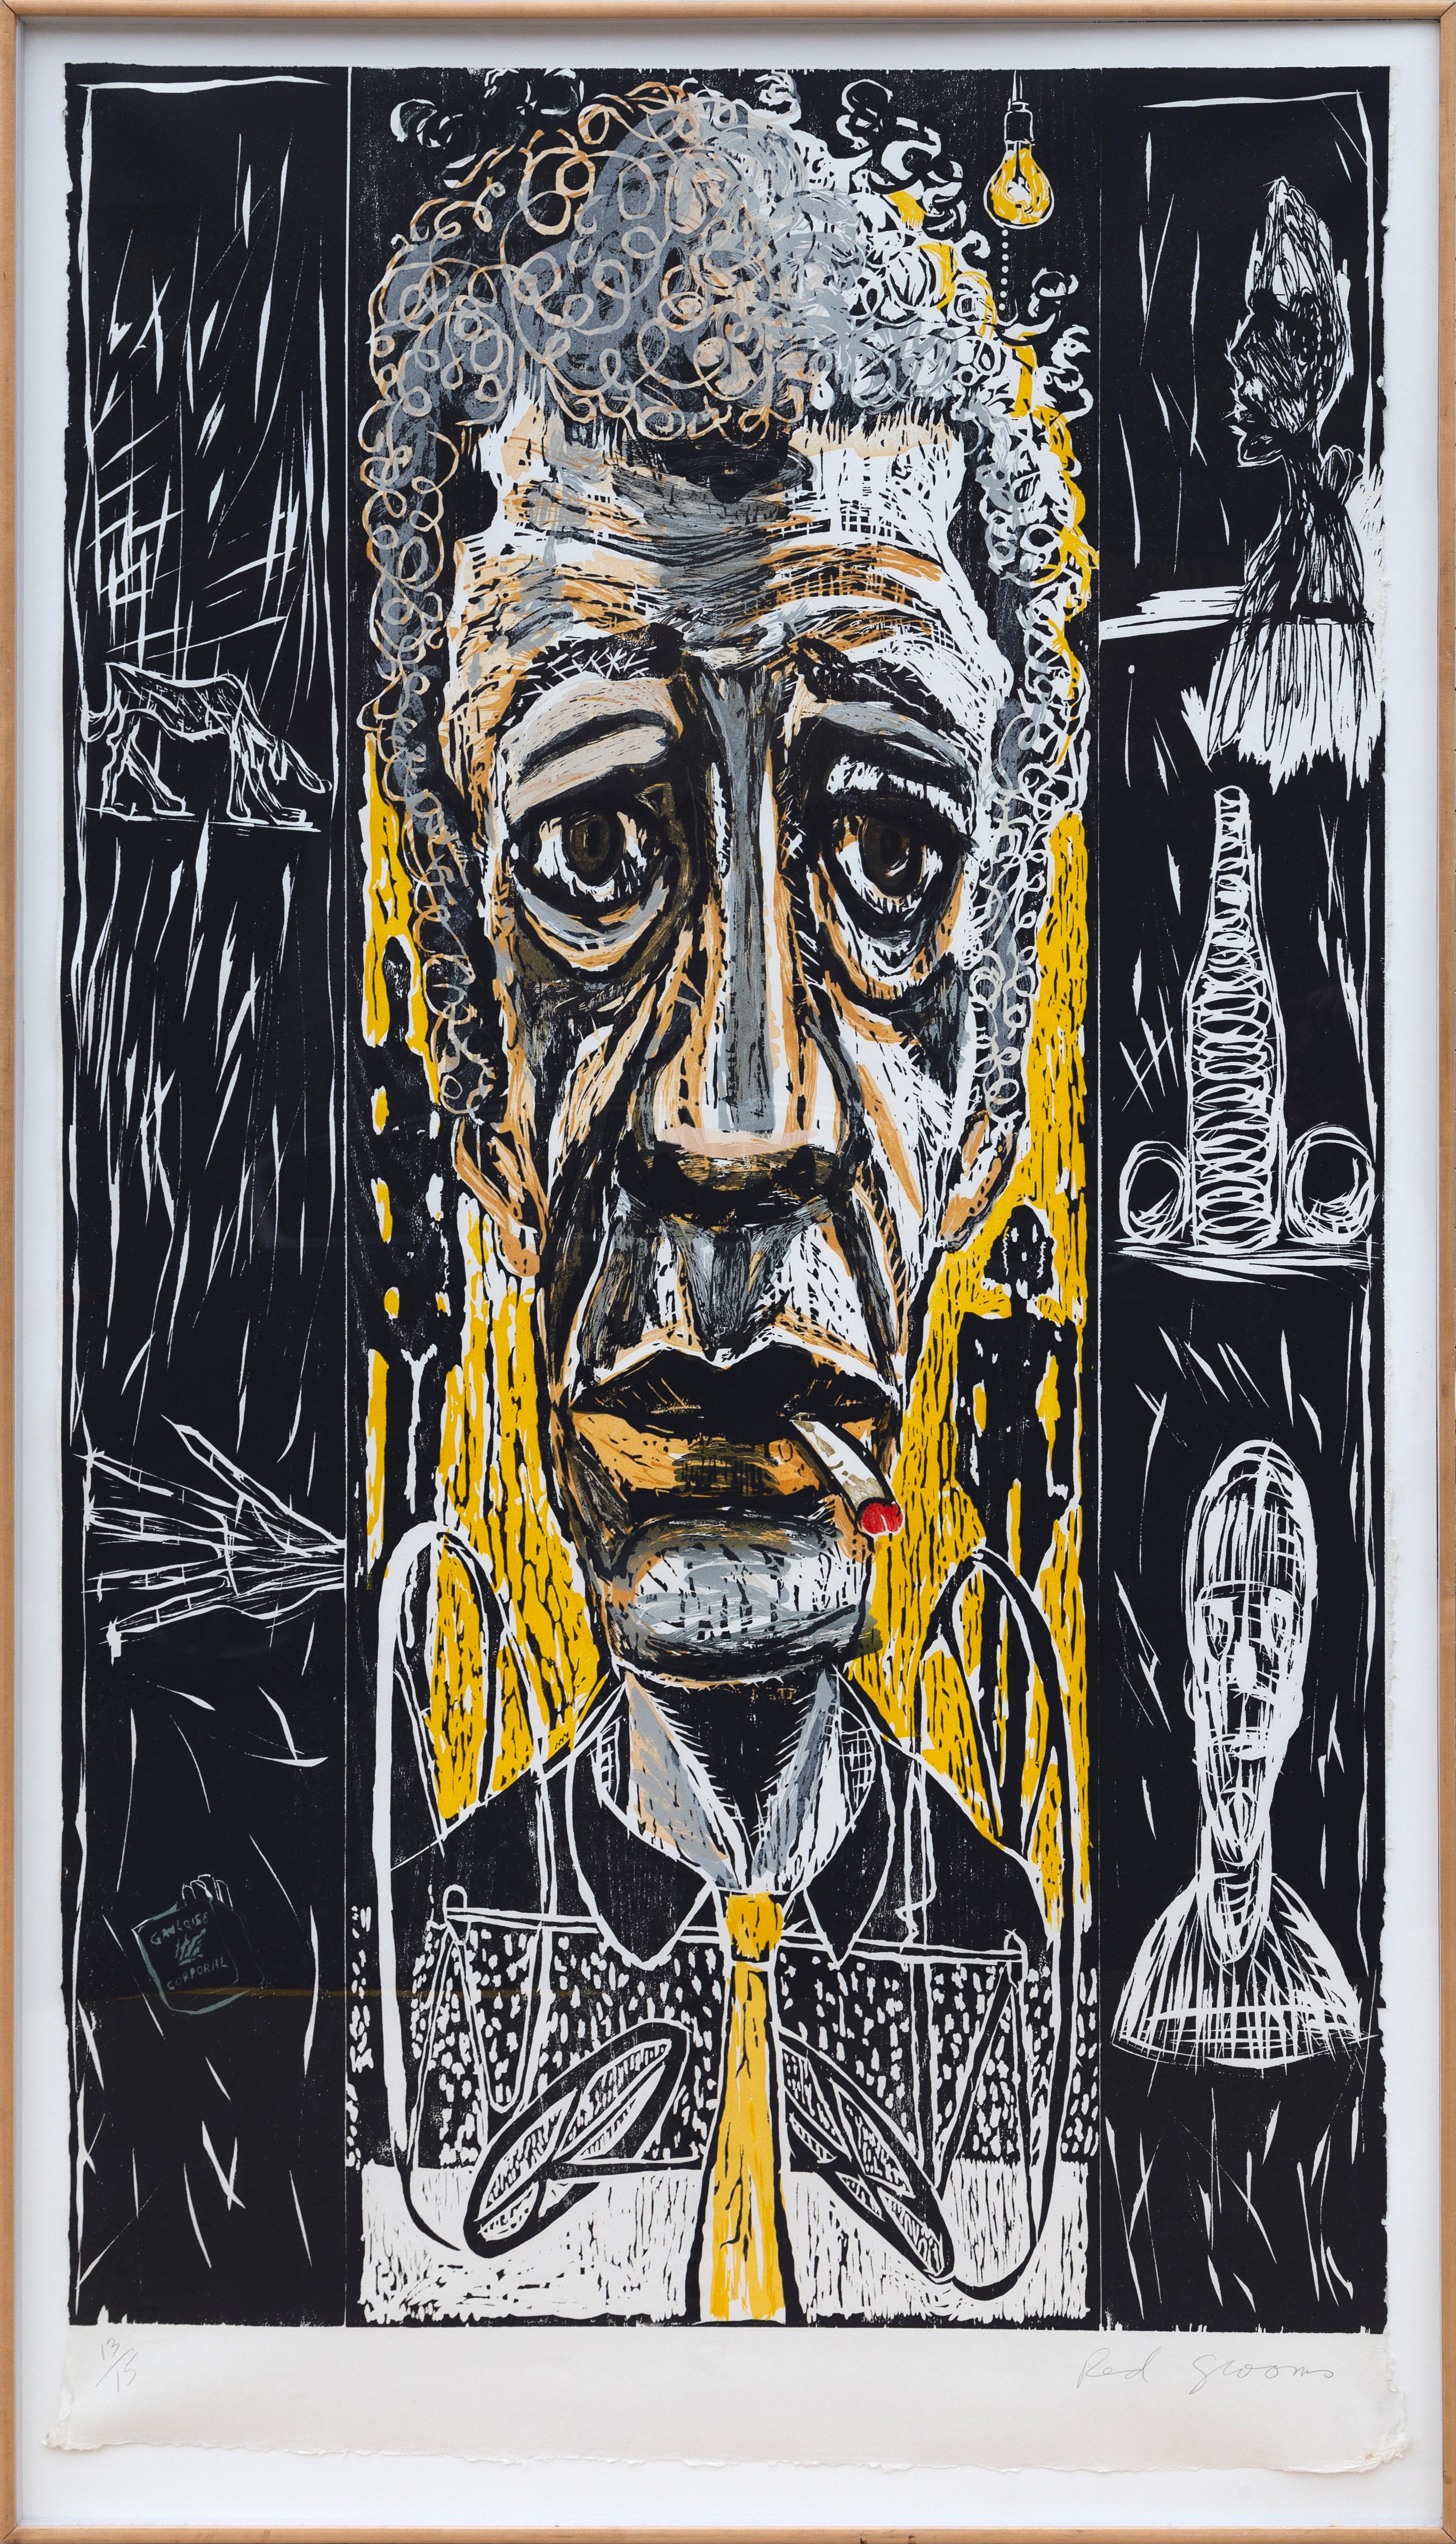 Artist: Red Grooms, American (1937 - )
Title: The Existentialist (Portrait of Giacometti)
Year: 1984
Medium: Woodcut in colors, signed and numbered in pencil 
Edition: 13/15
Size: 75 x 43.5 in. (190.5 x 110.49 cm)
Frame: 77 x 46.5 inches

Referenced